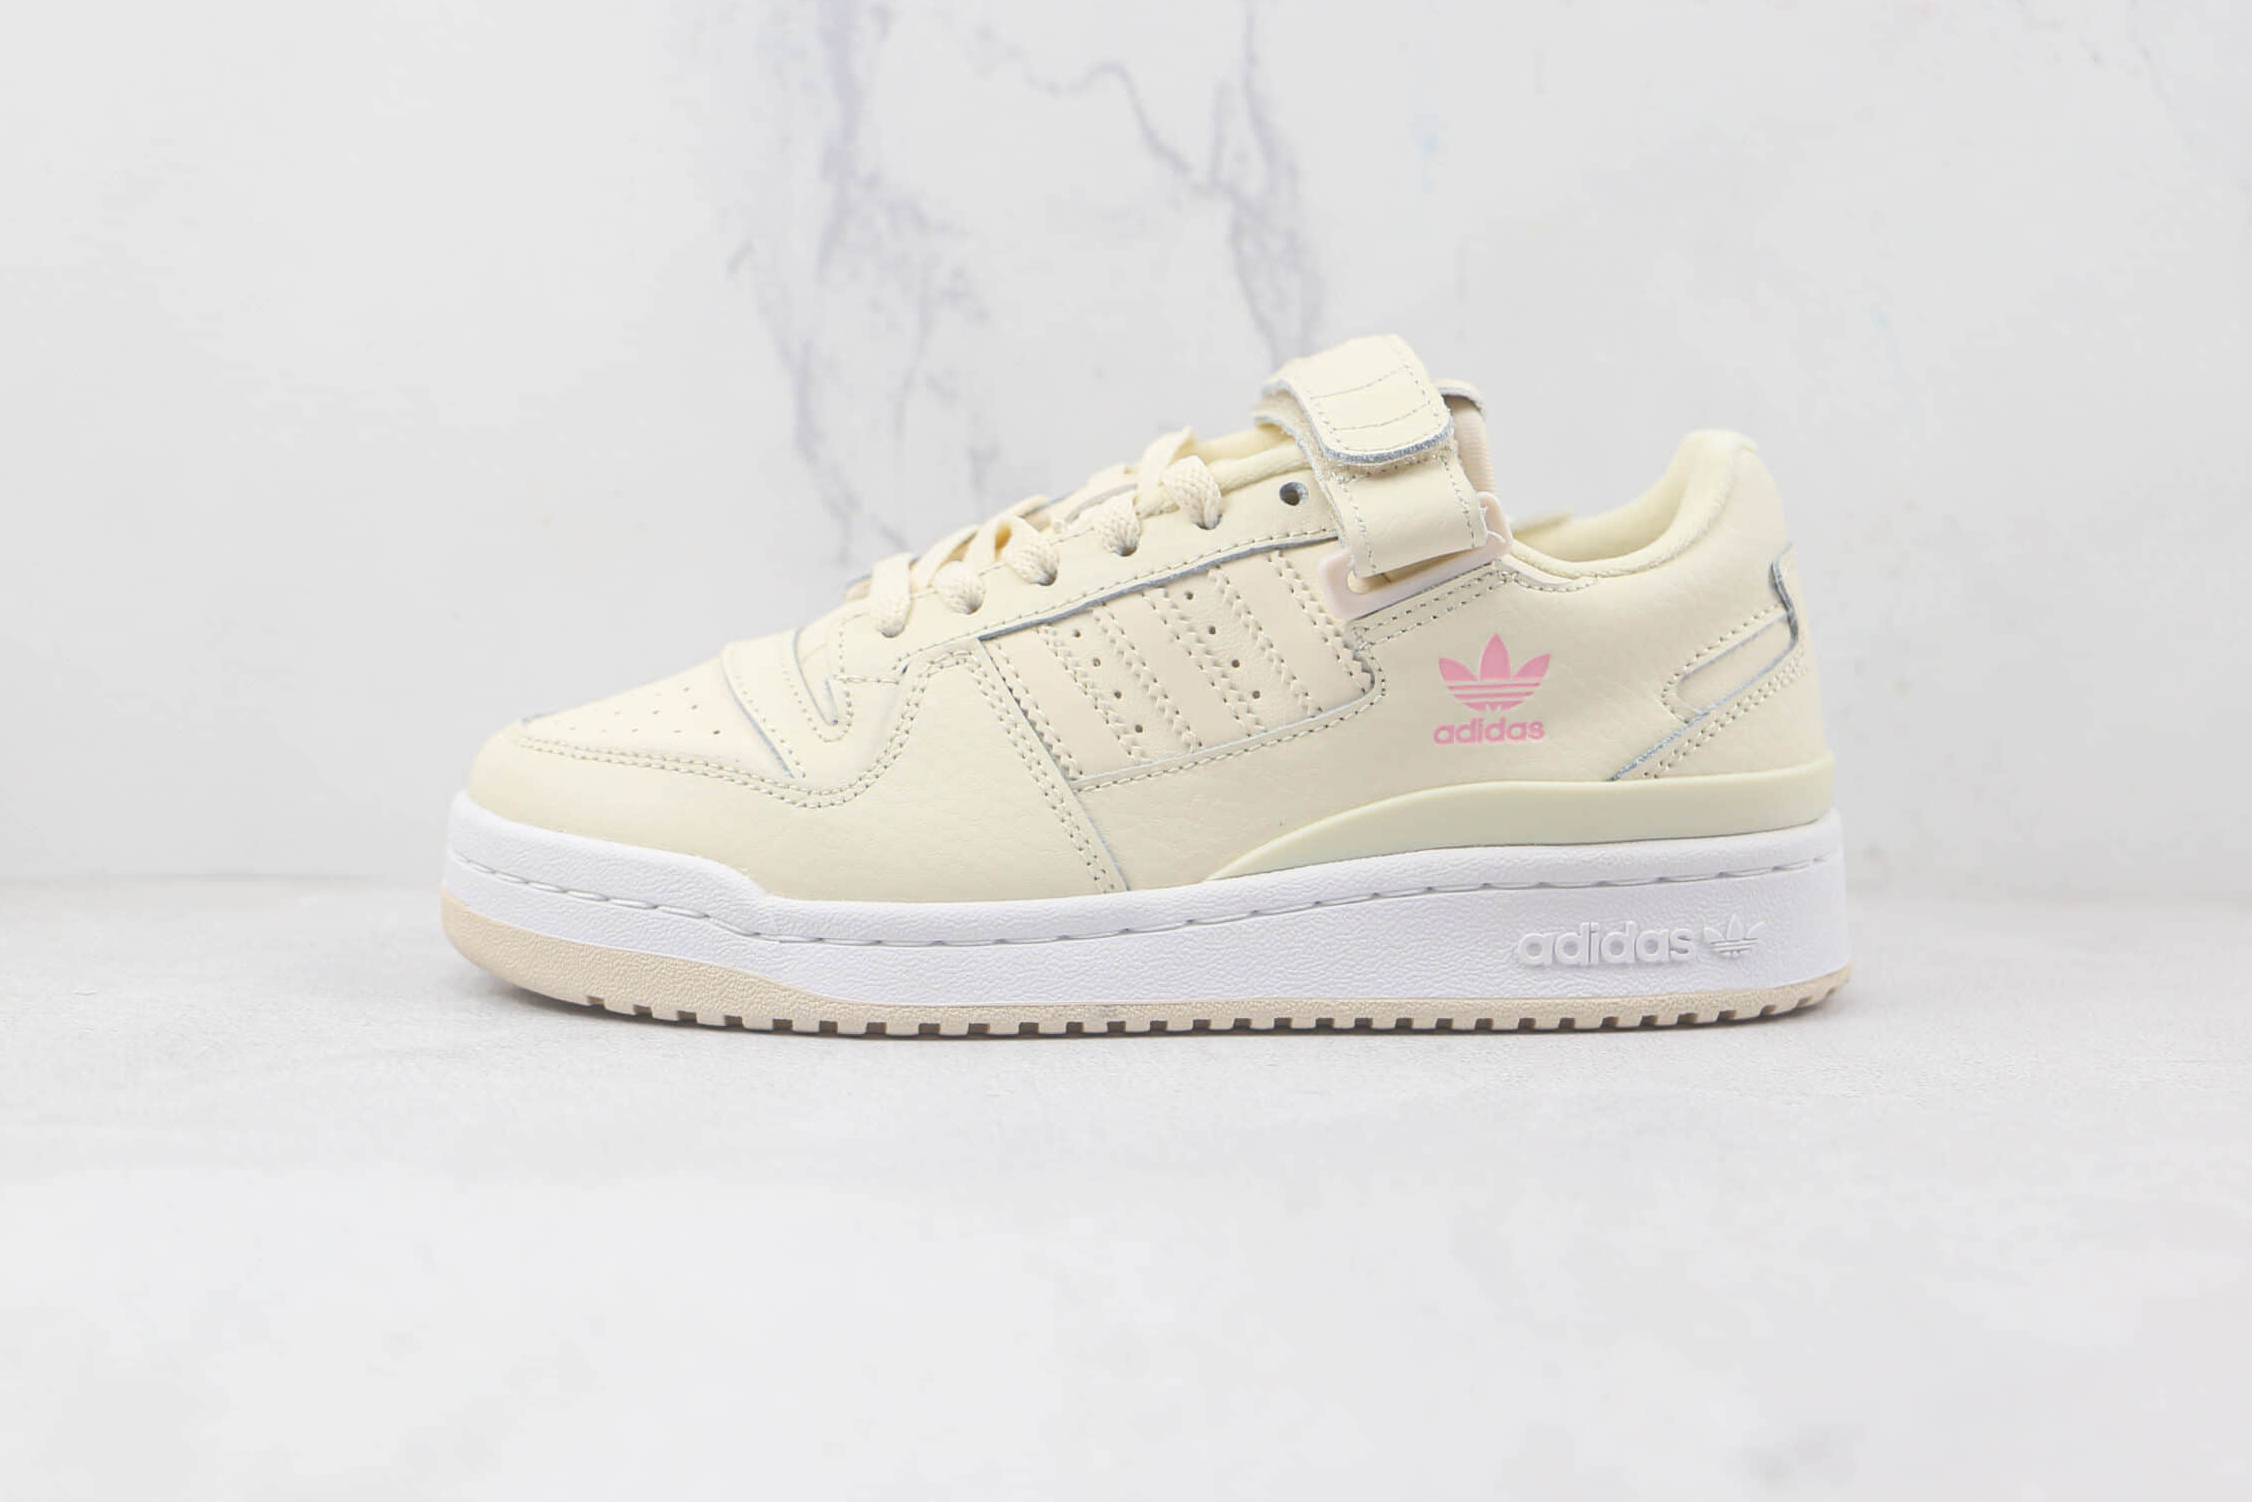 Adidas Forum Low Wonder White Halo Blue Pink GV9190 - Stylish Sneakers for Every Outfit!